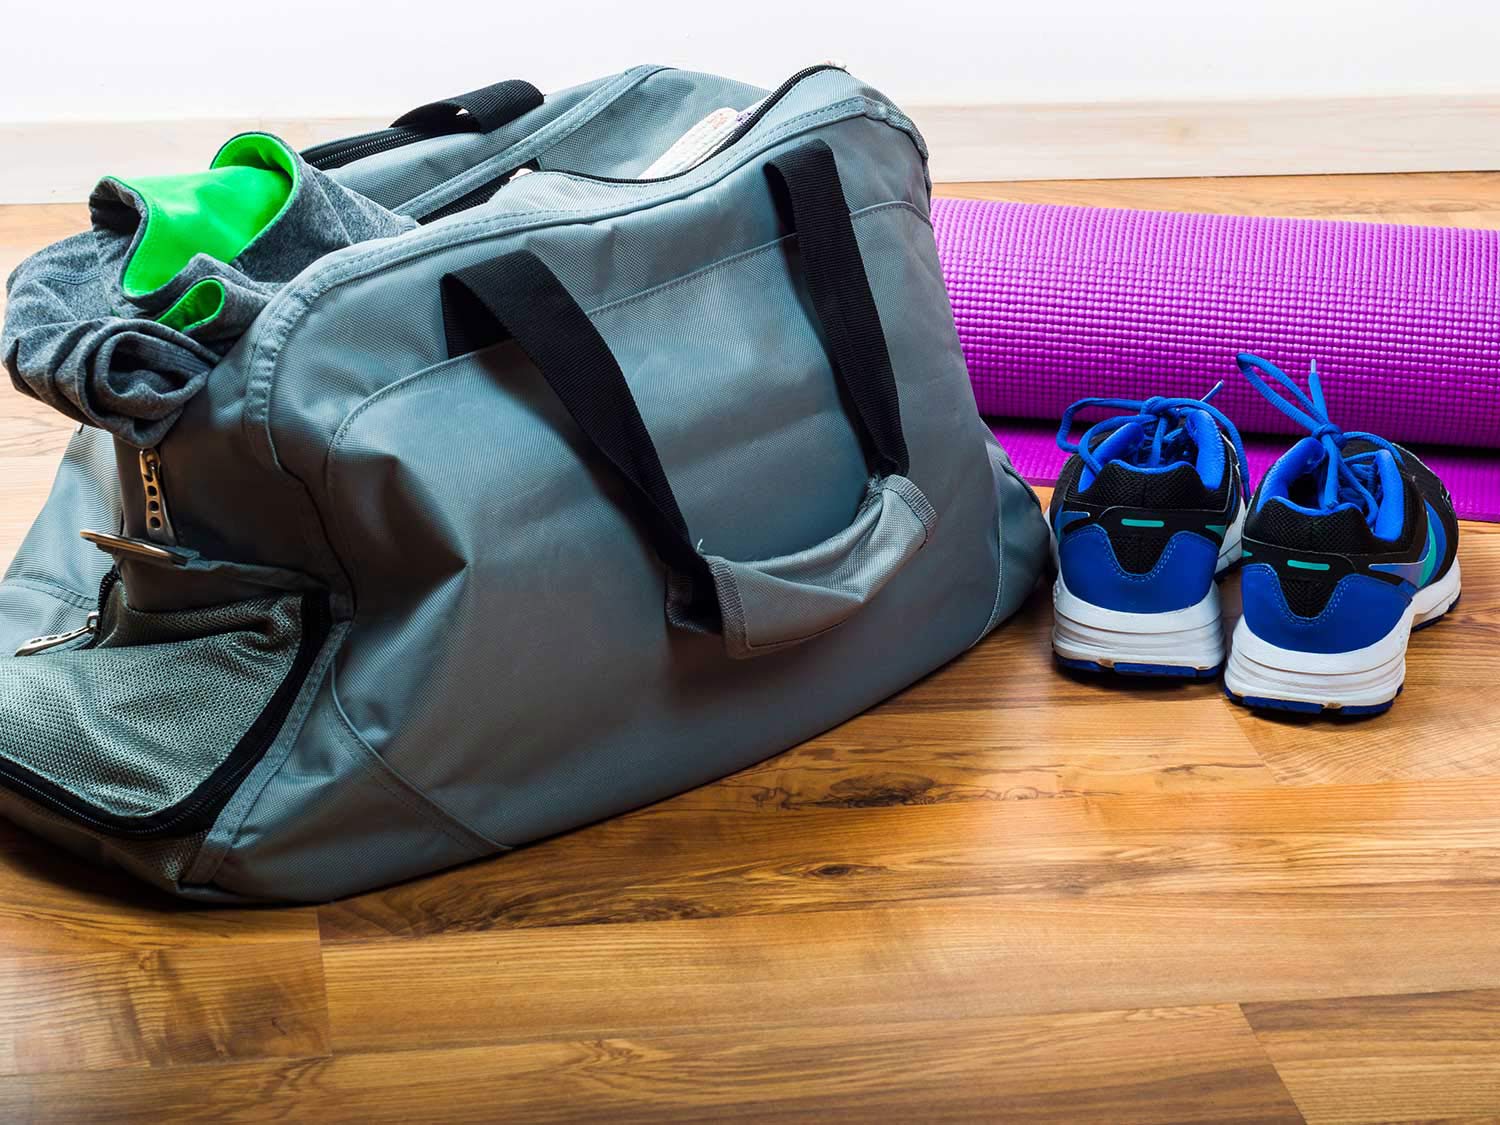 A gym bag with yoga mat and sneakers.